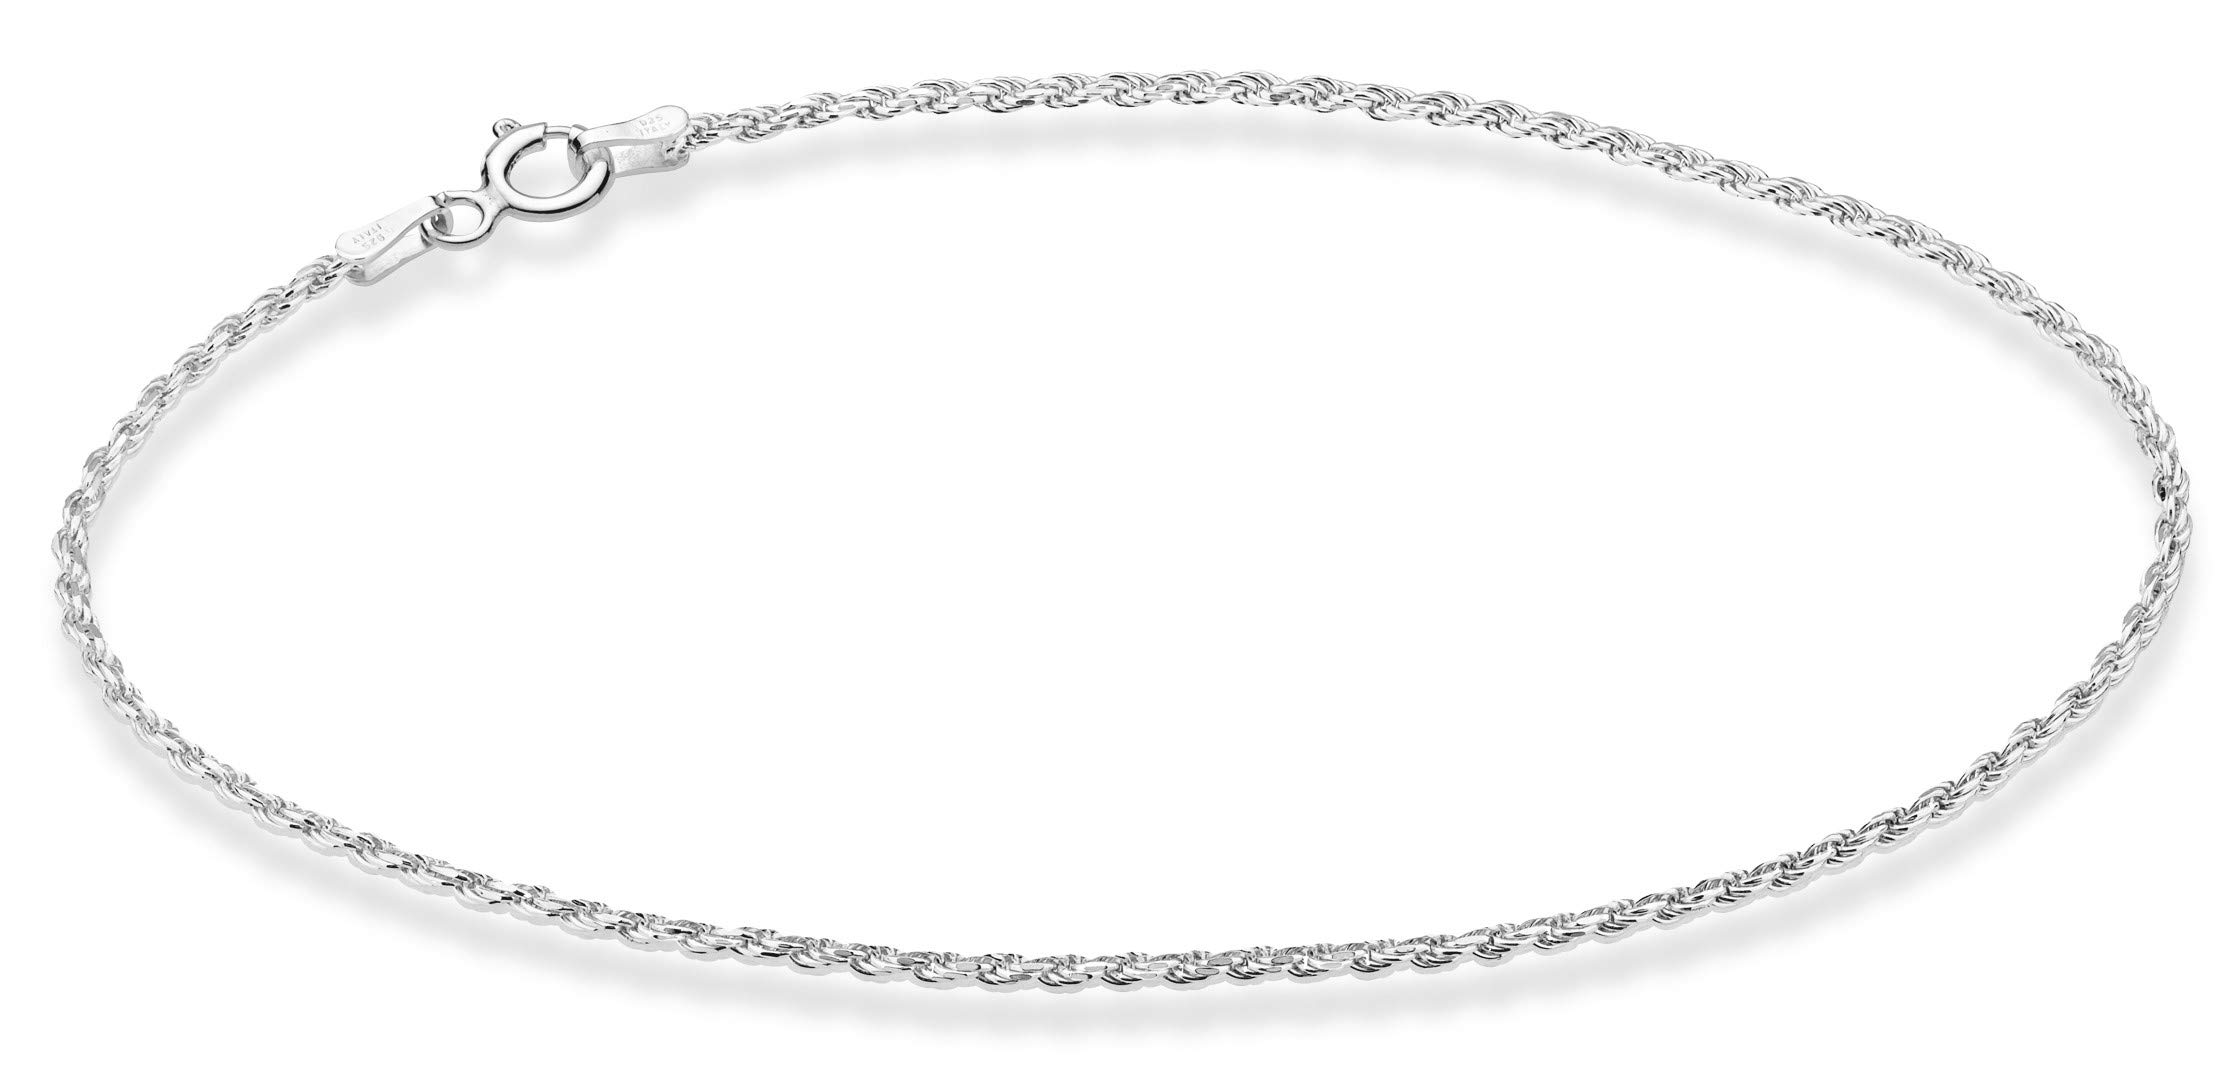 Miabella 925 Sterling Silver Solid 1.5mm Diamond-Cut Braided Rope Chain Anklet Ankle Bracelet for Women Teen Girls, Made in Italy